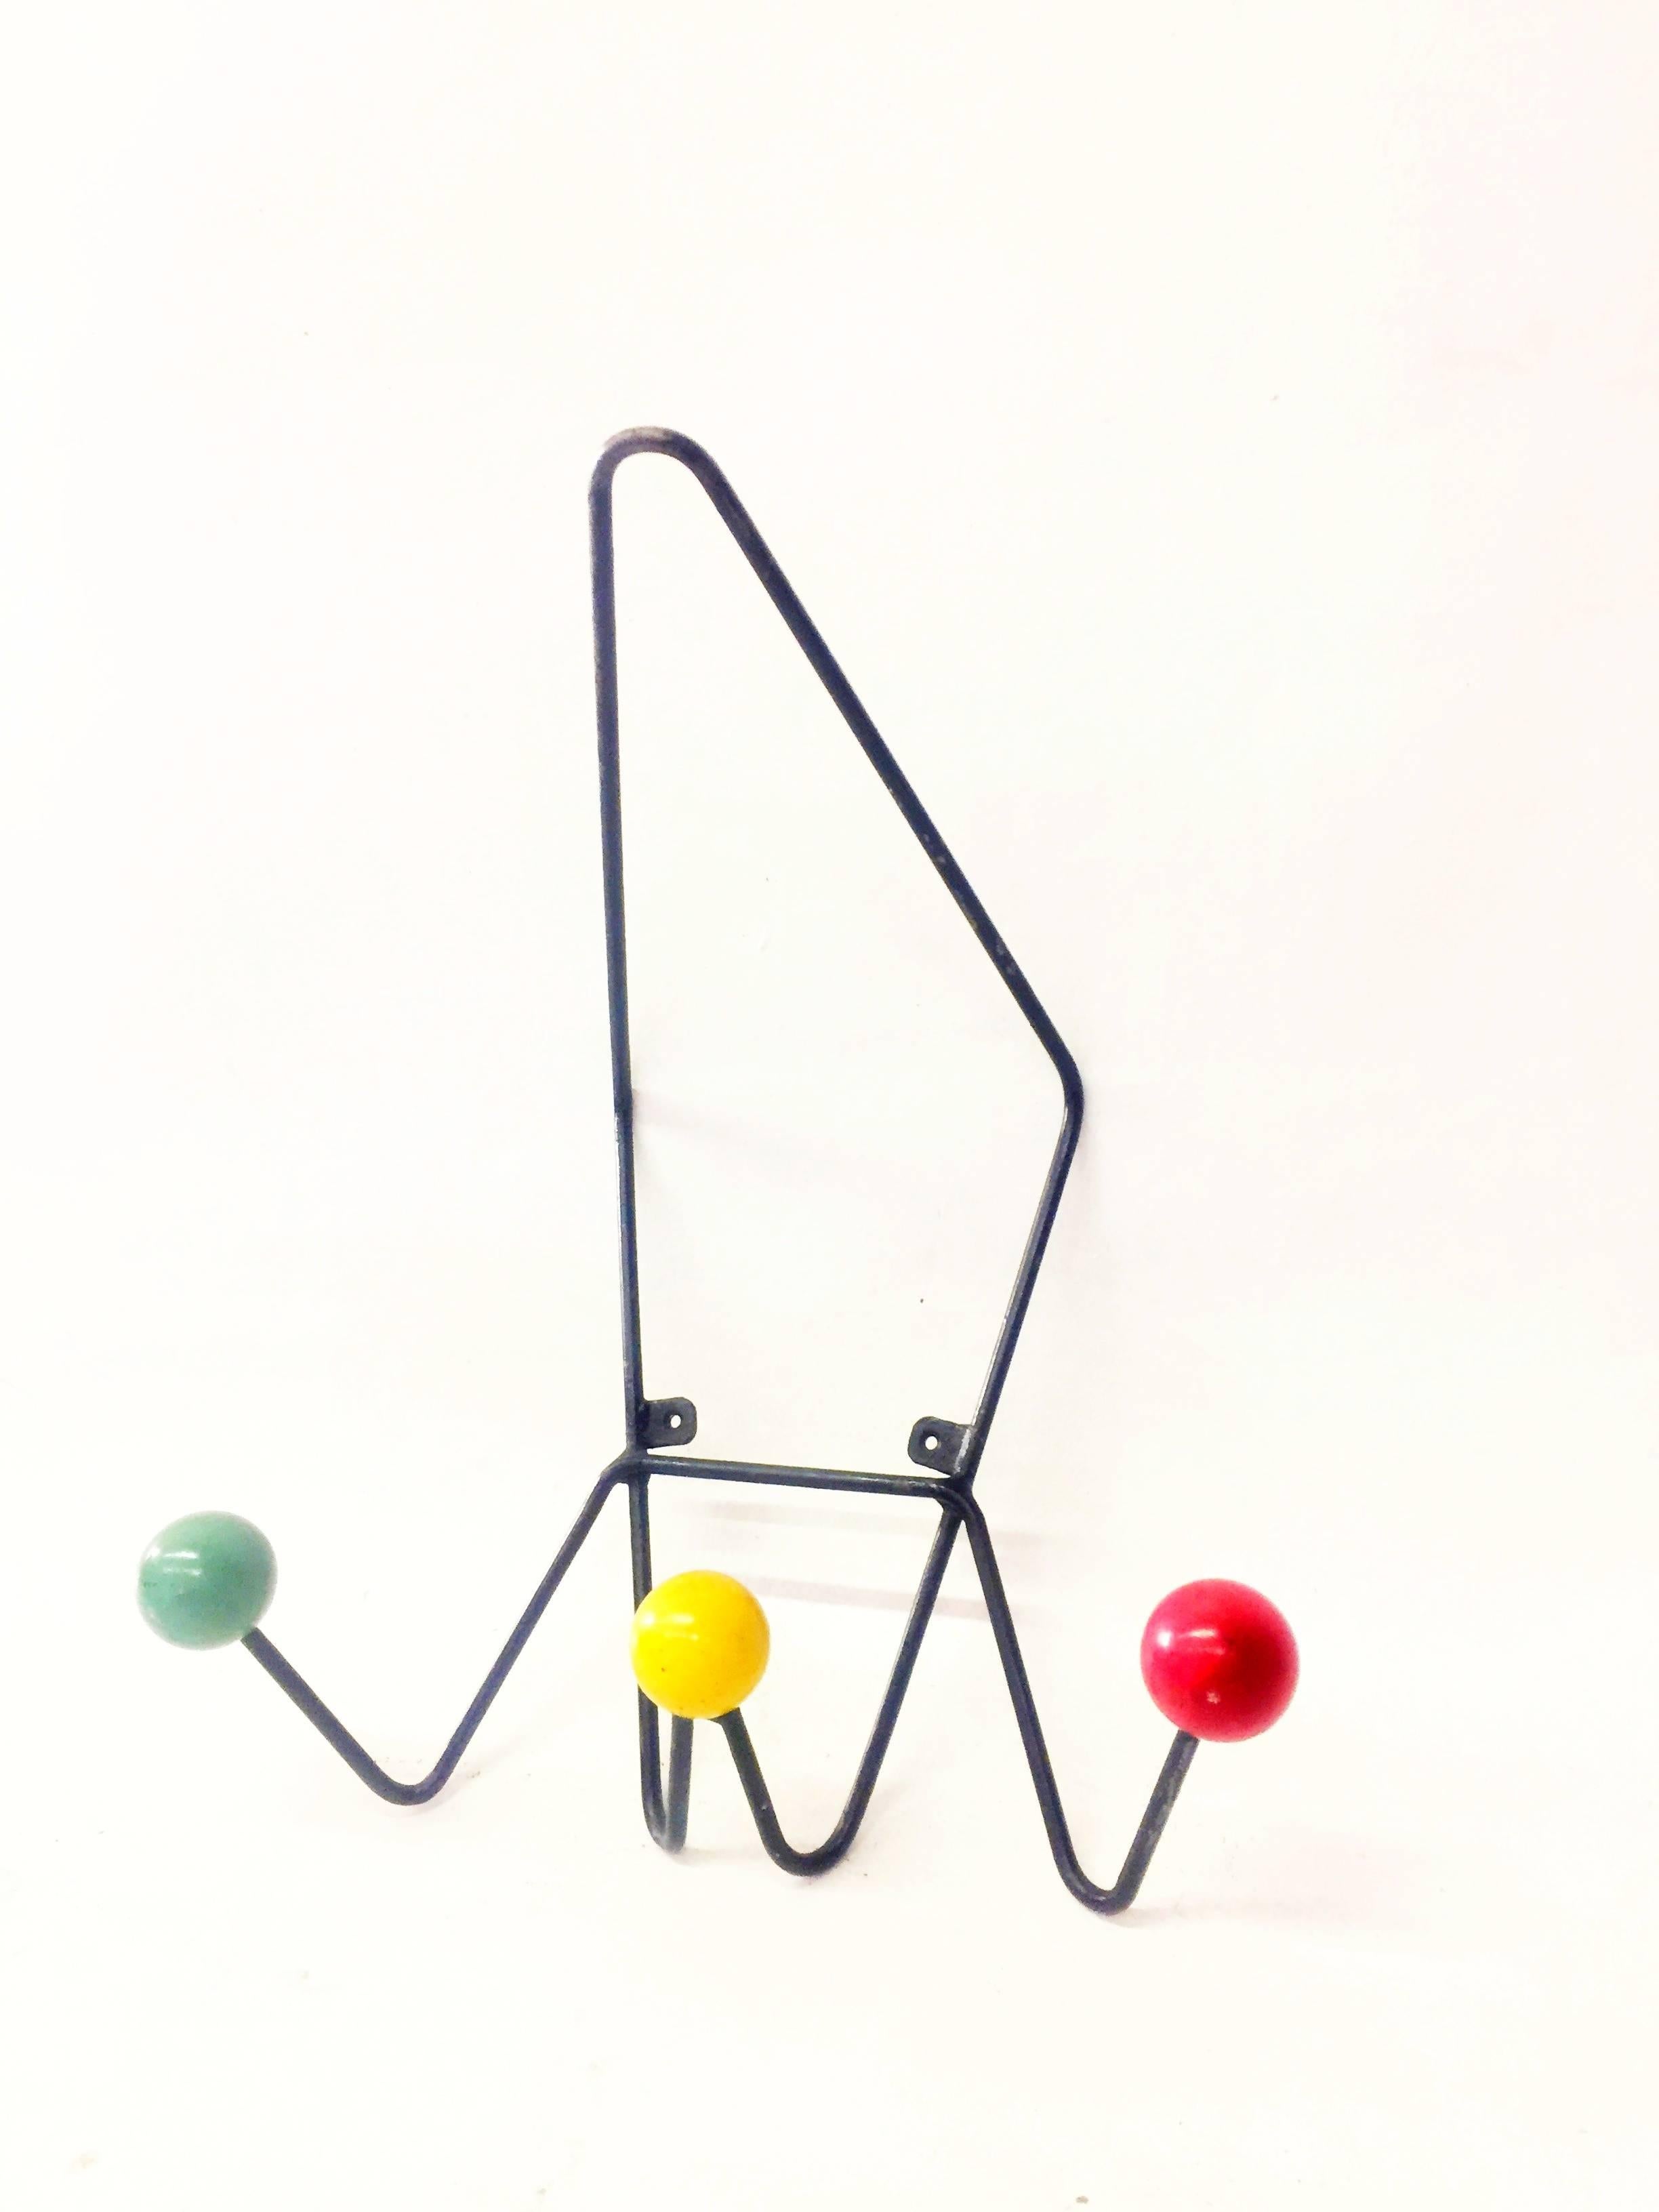 Wall-mounted metal coat hook with three colorful balls on the end of each section. Each ball measures approximately 2 inches in diameter. Please see our separate listing for the matching standing coat rack.